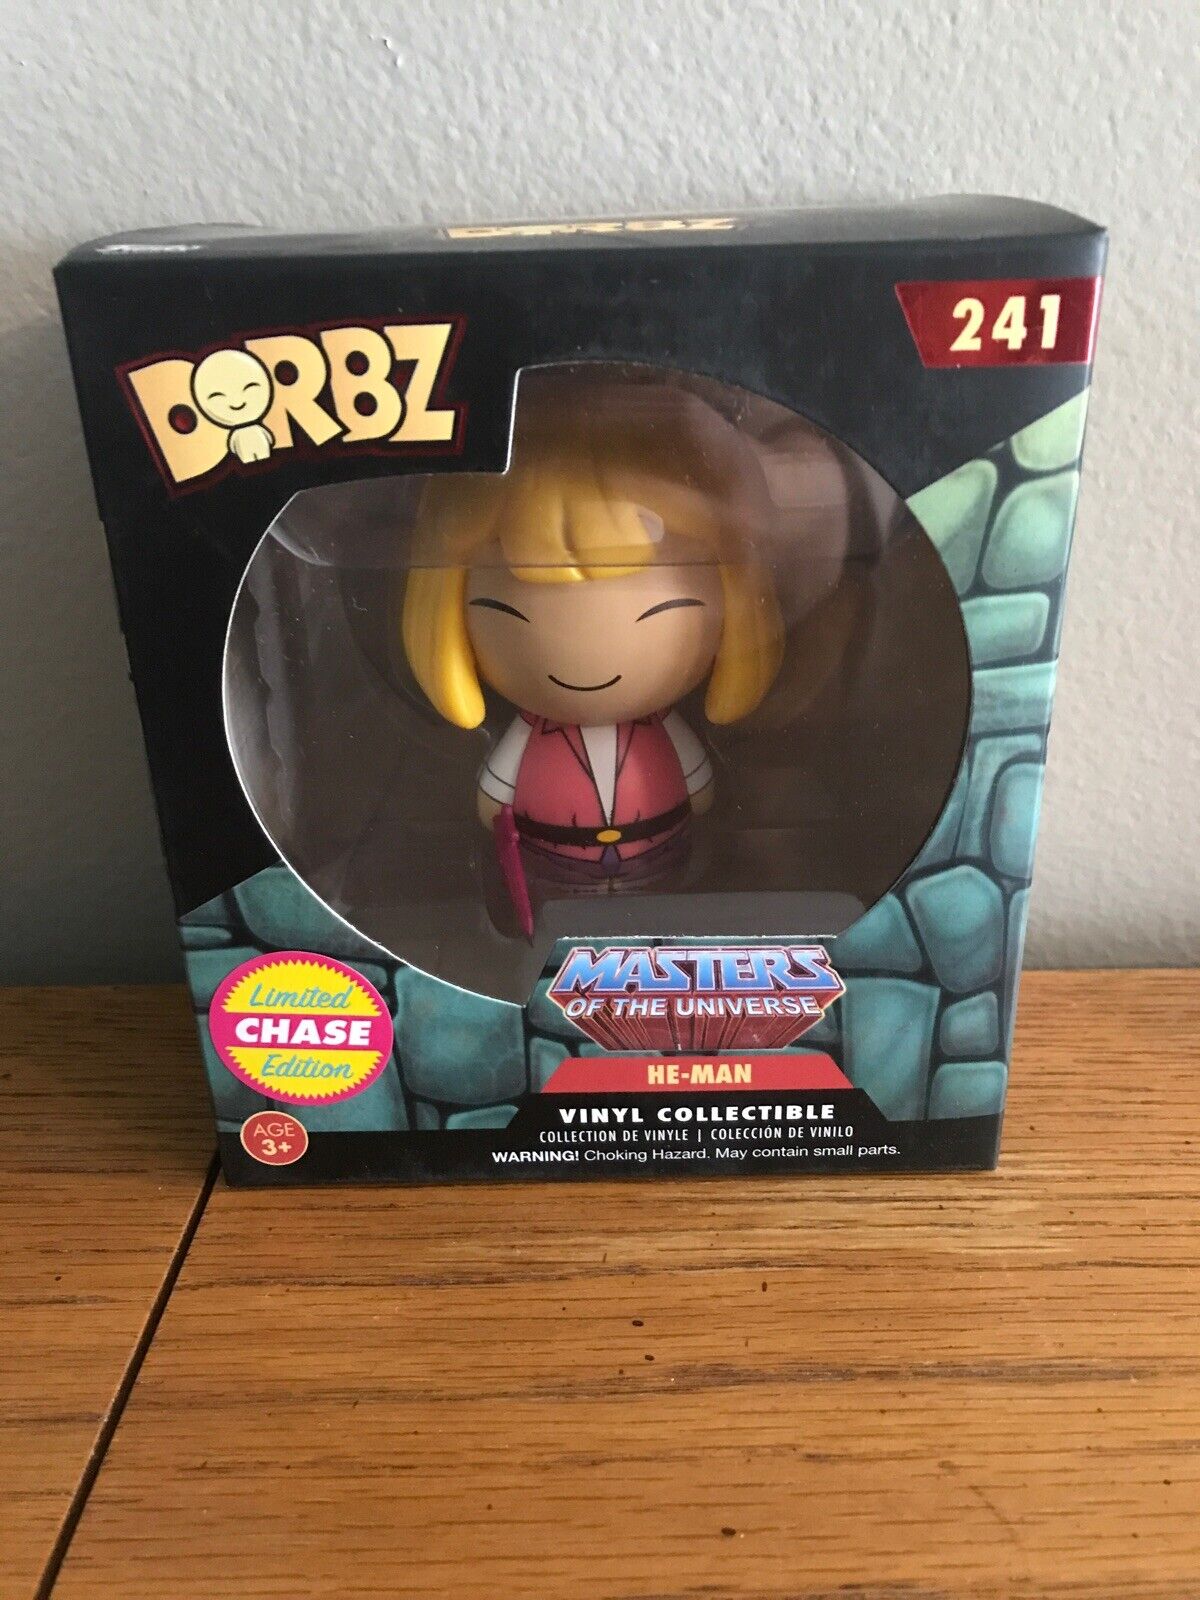 Funko Dorbz Vinyl Figure- Masters of the Universe: HE-MAN LIMITED CHASE EDITION